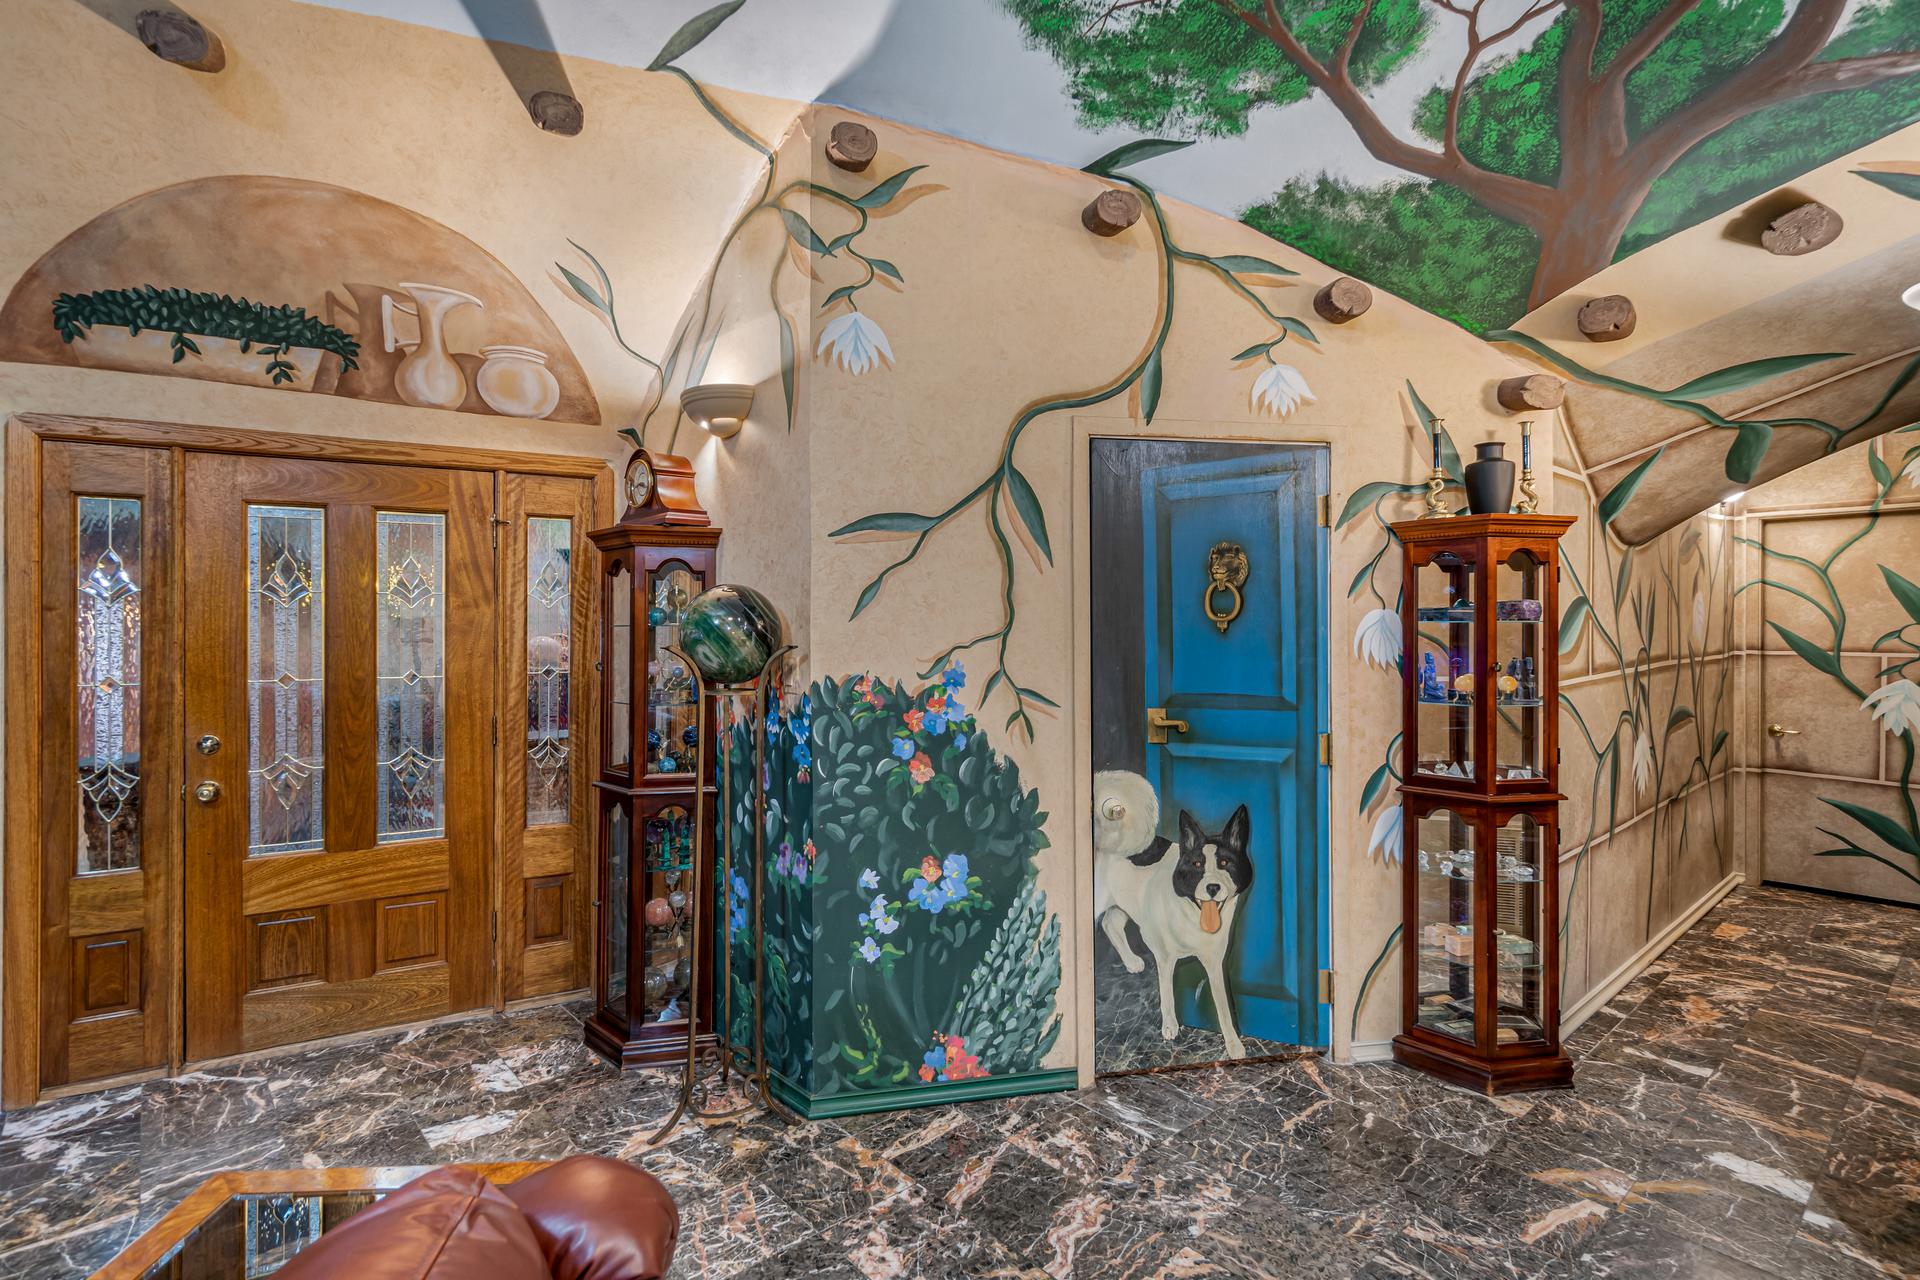 The front door, a hallway, and the door to the pantry feature whimsical murals.